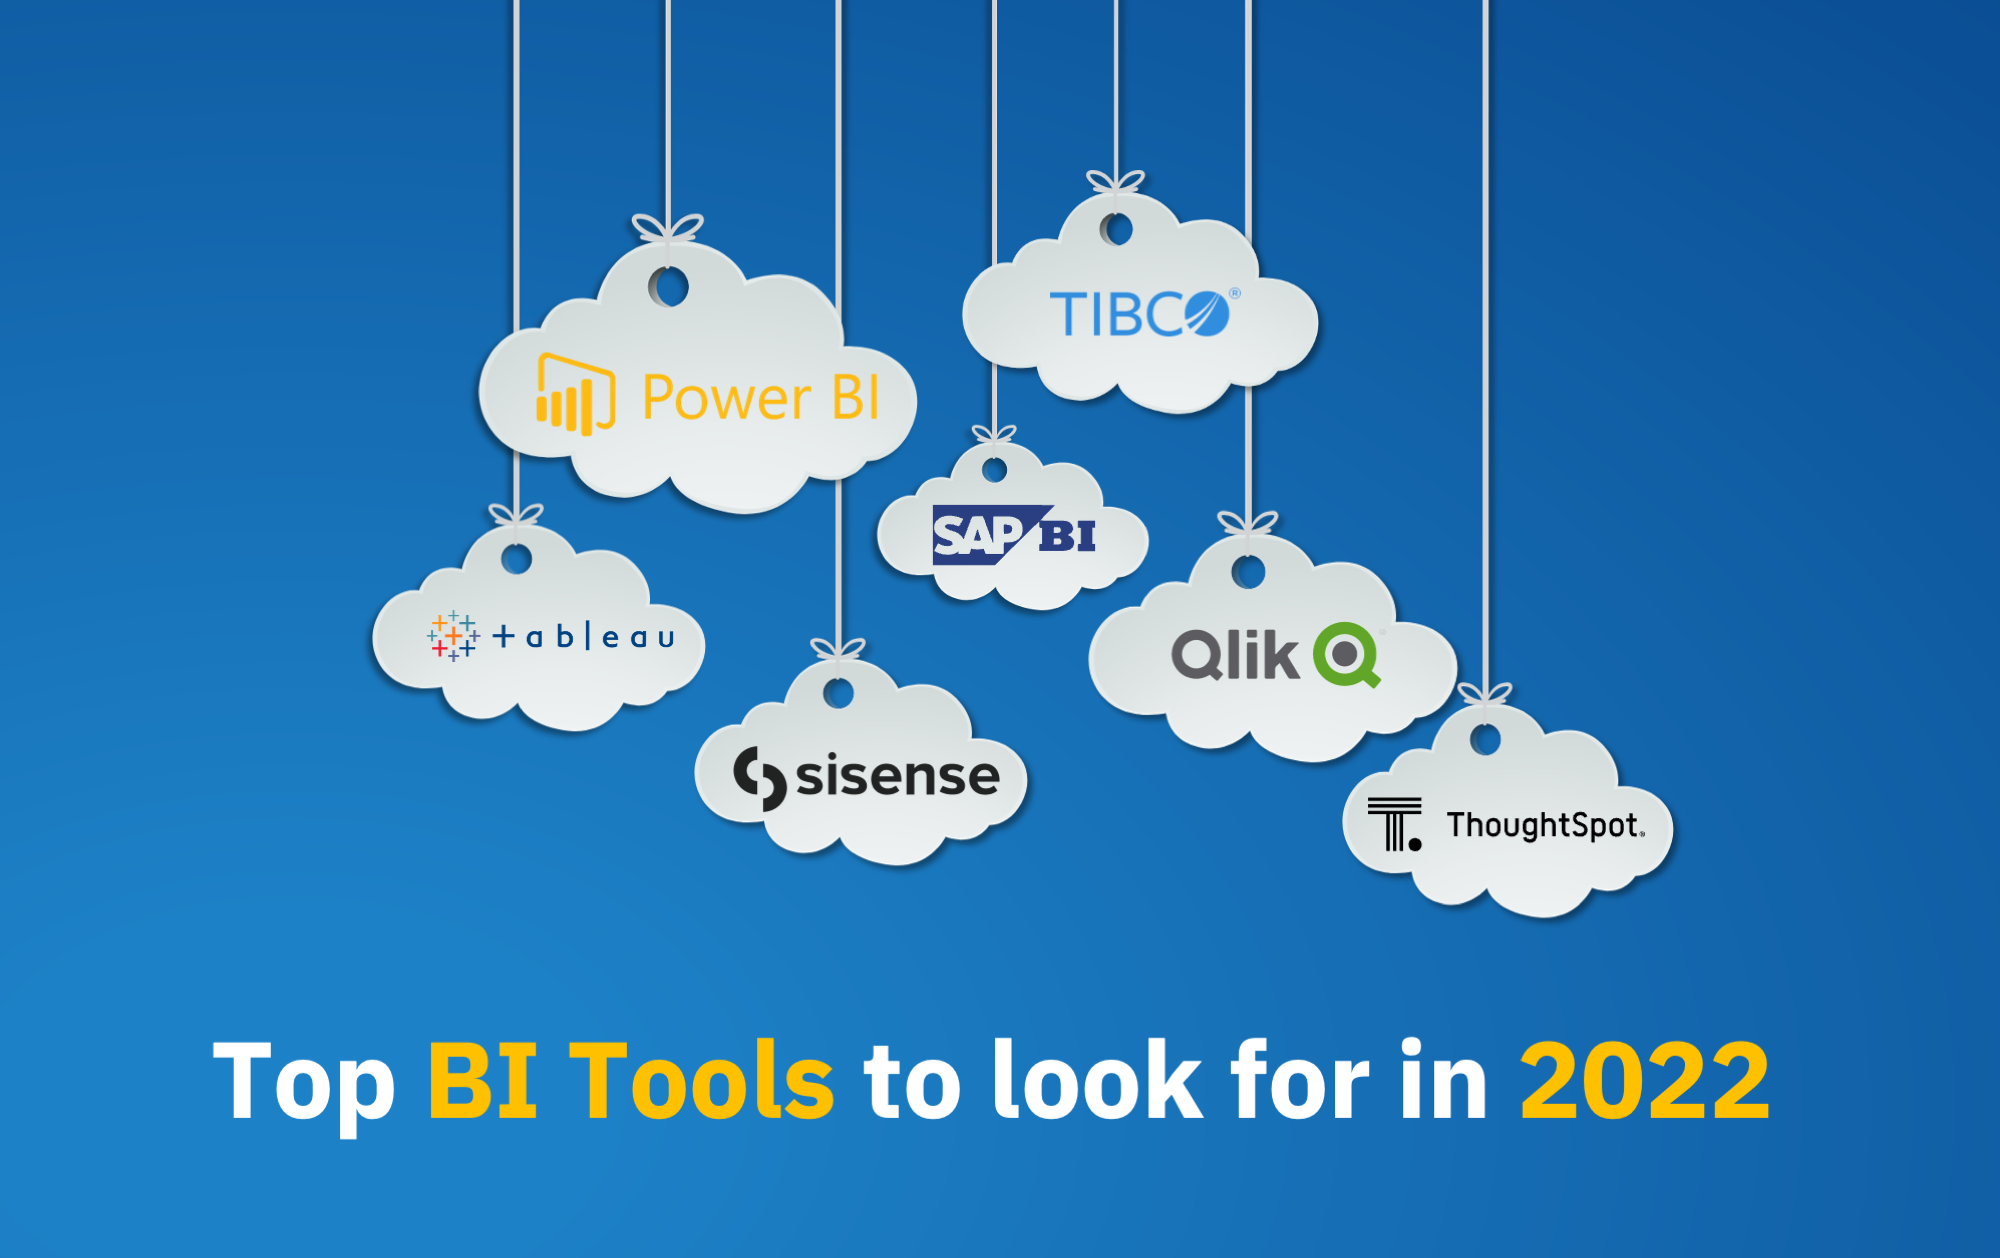 Top BI tools to look for in 2022